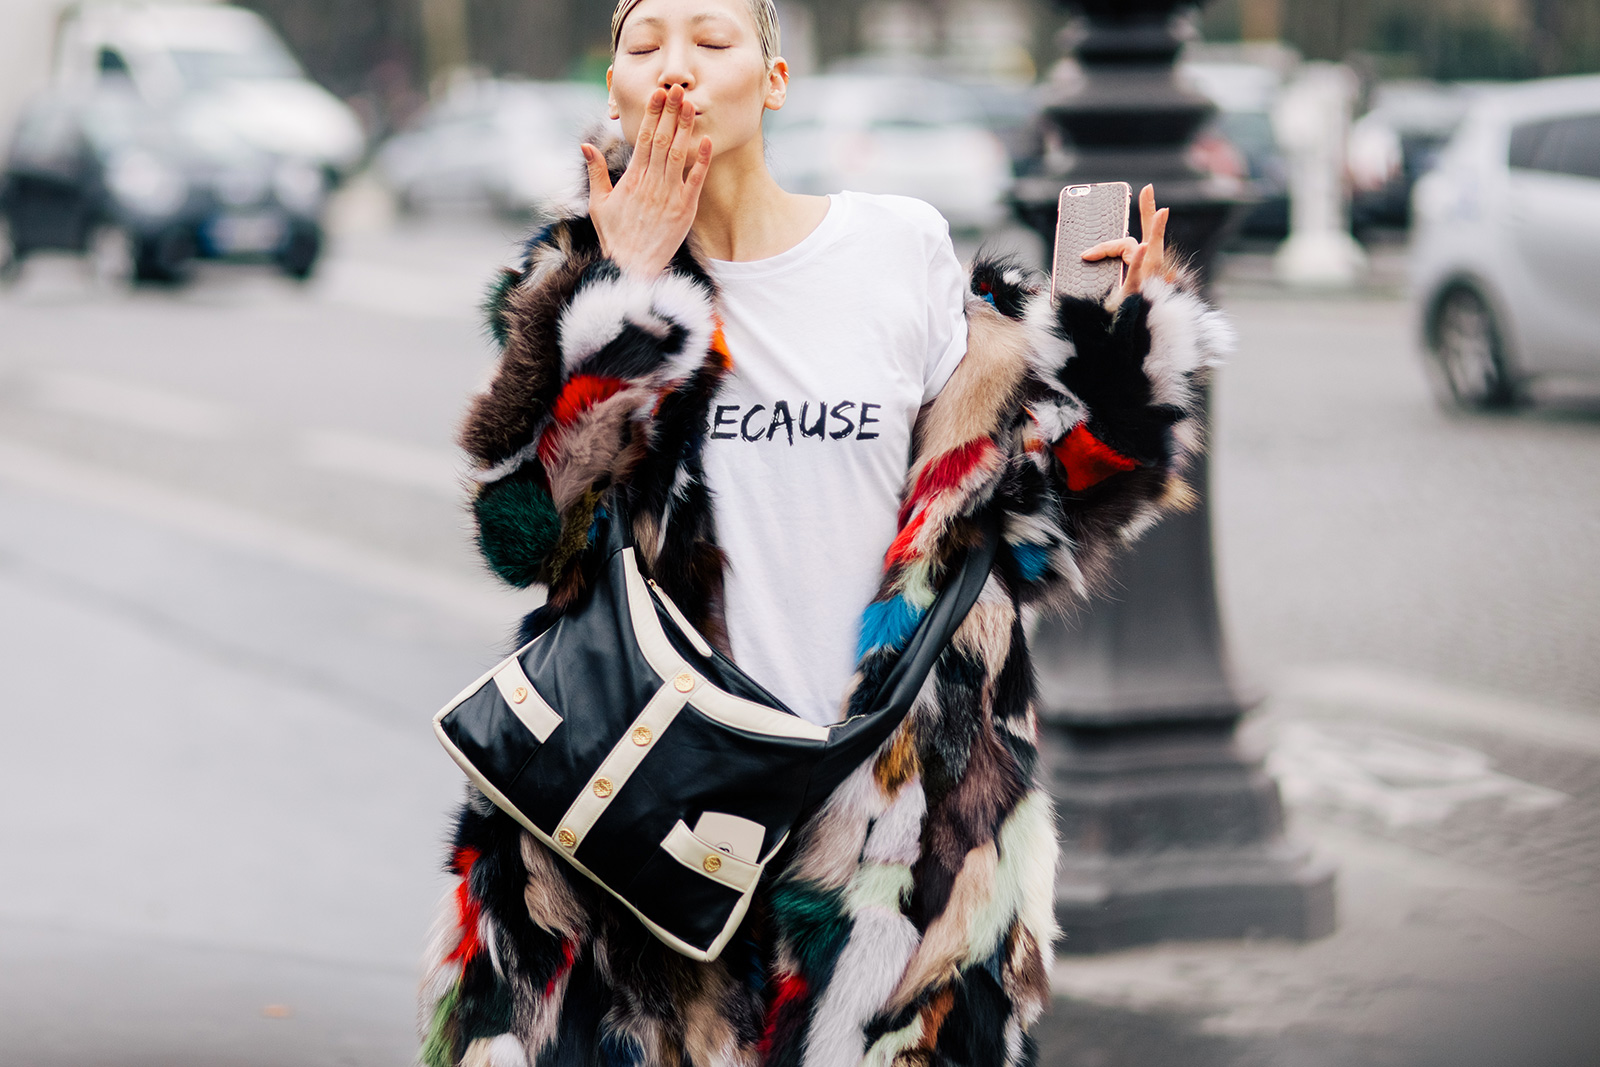 Soo Joo Park wearing leather pants, multicolored fur coat and a Chanel bag after the Chanel Fall 2015 Fashion Show in Paris, France